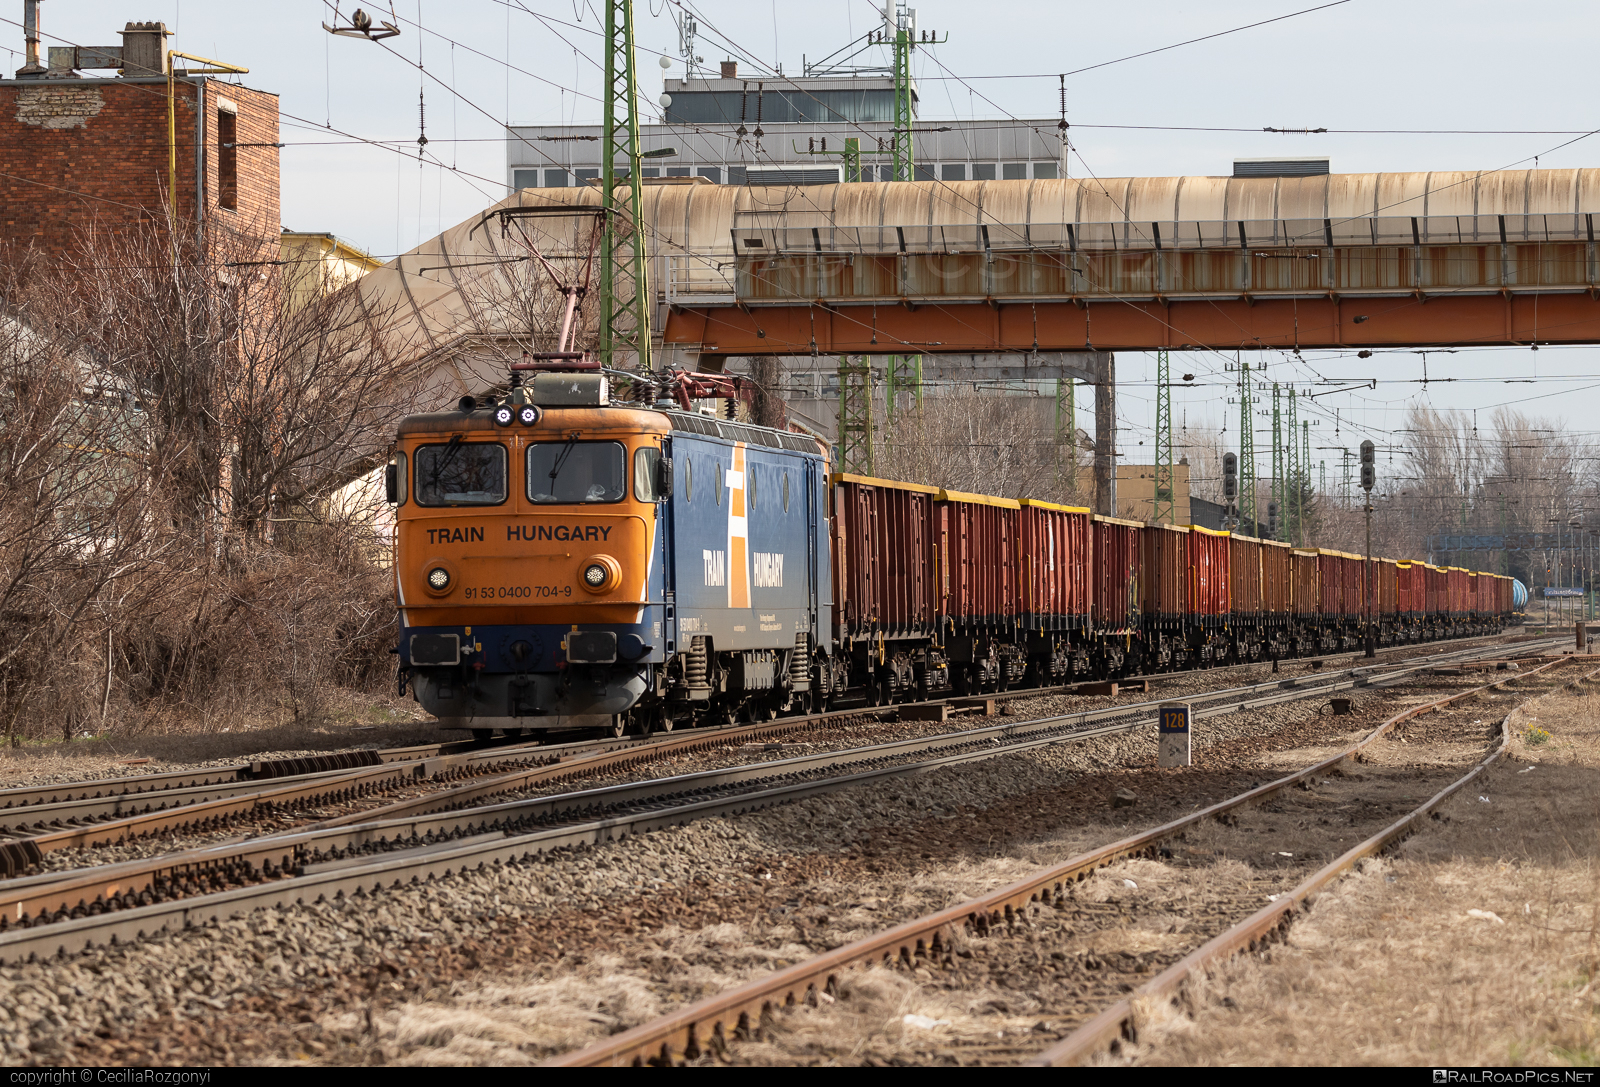 Electroputere LE 5100 - 0400 704 - 9 operated by Train Hungary Magánvasút Kft #TrainHungaryMaganvasut #TrainHungaryMaganvasutKft #electroputere #electroputerecraiova #electroputerele5100 #le5100 #openwagon #trainhungary